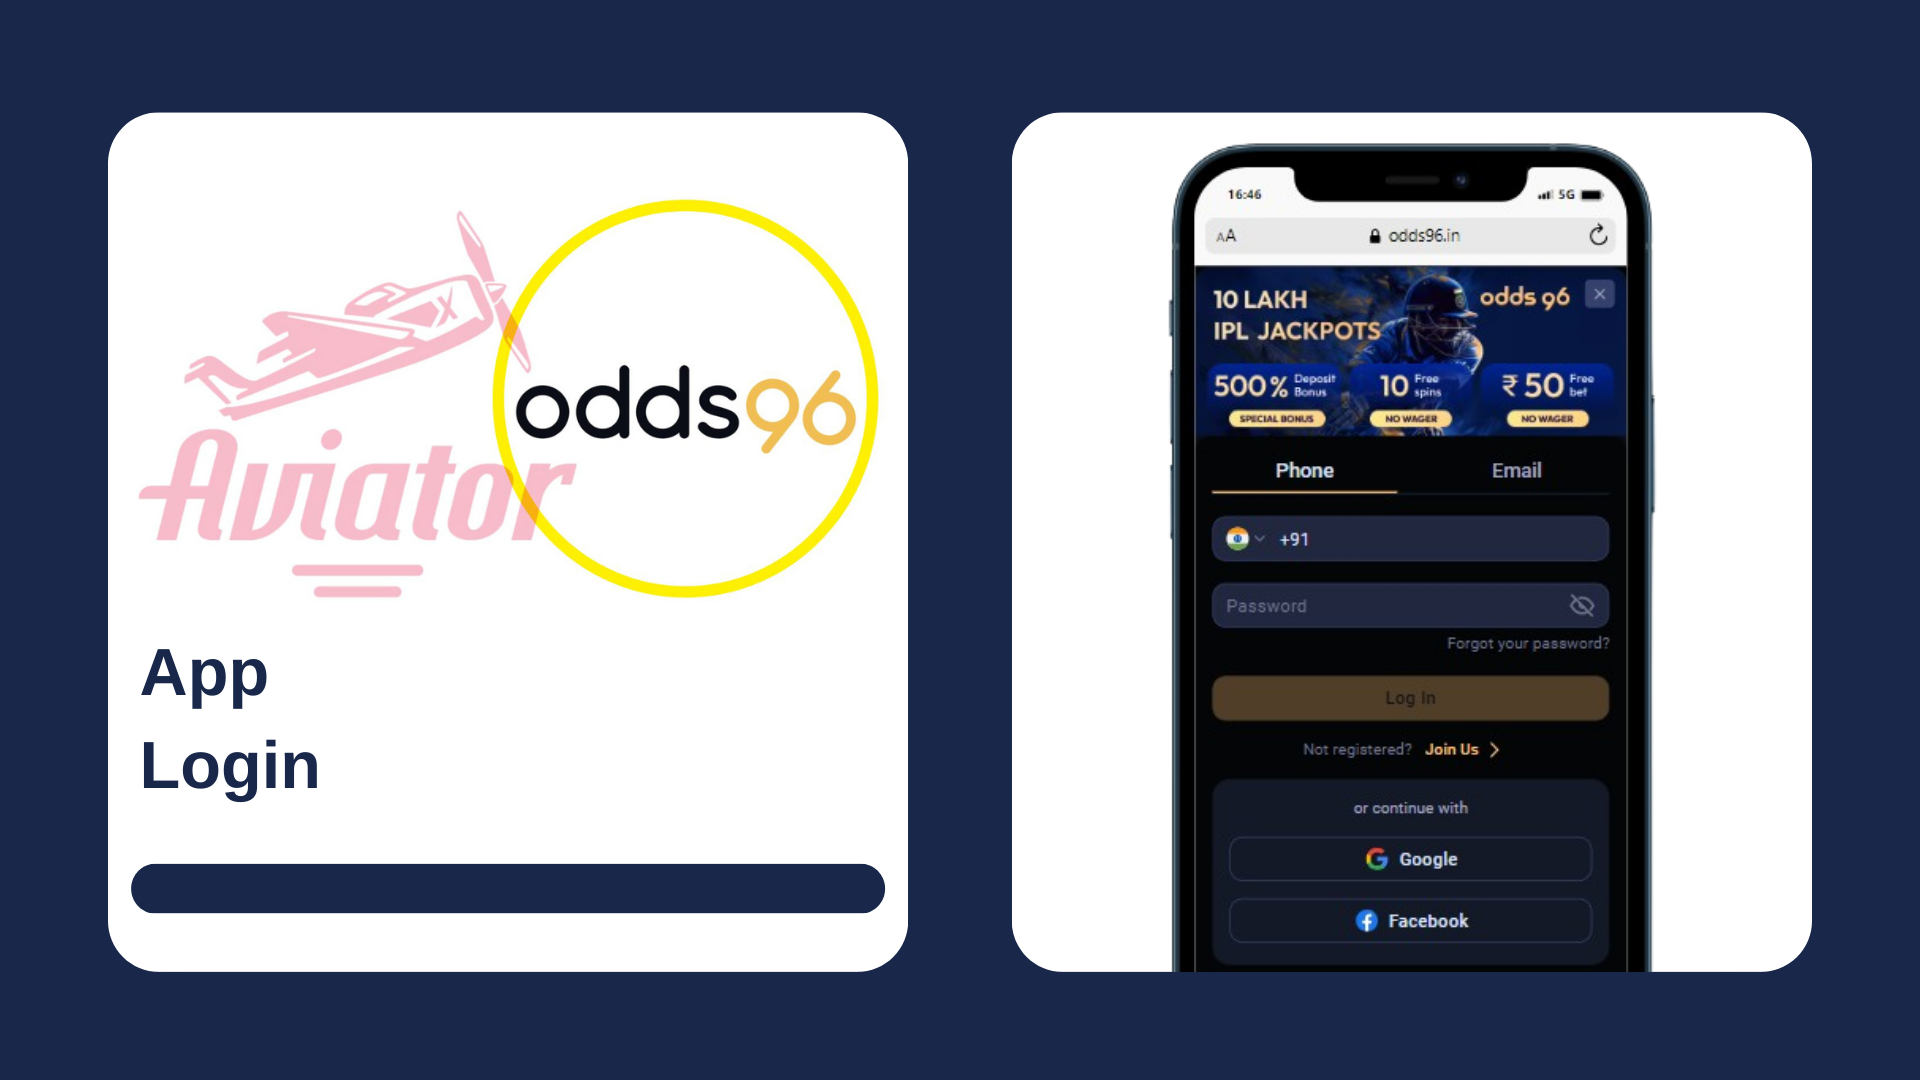 A smartphone showing login form of the casino, with Aviator game and Odds96 logos